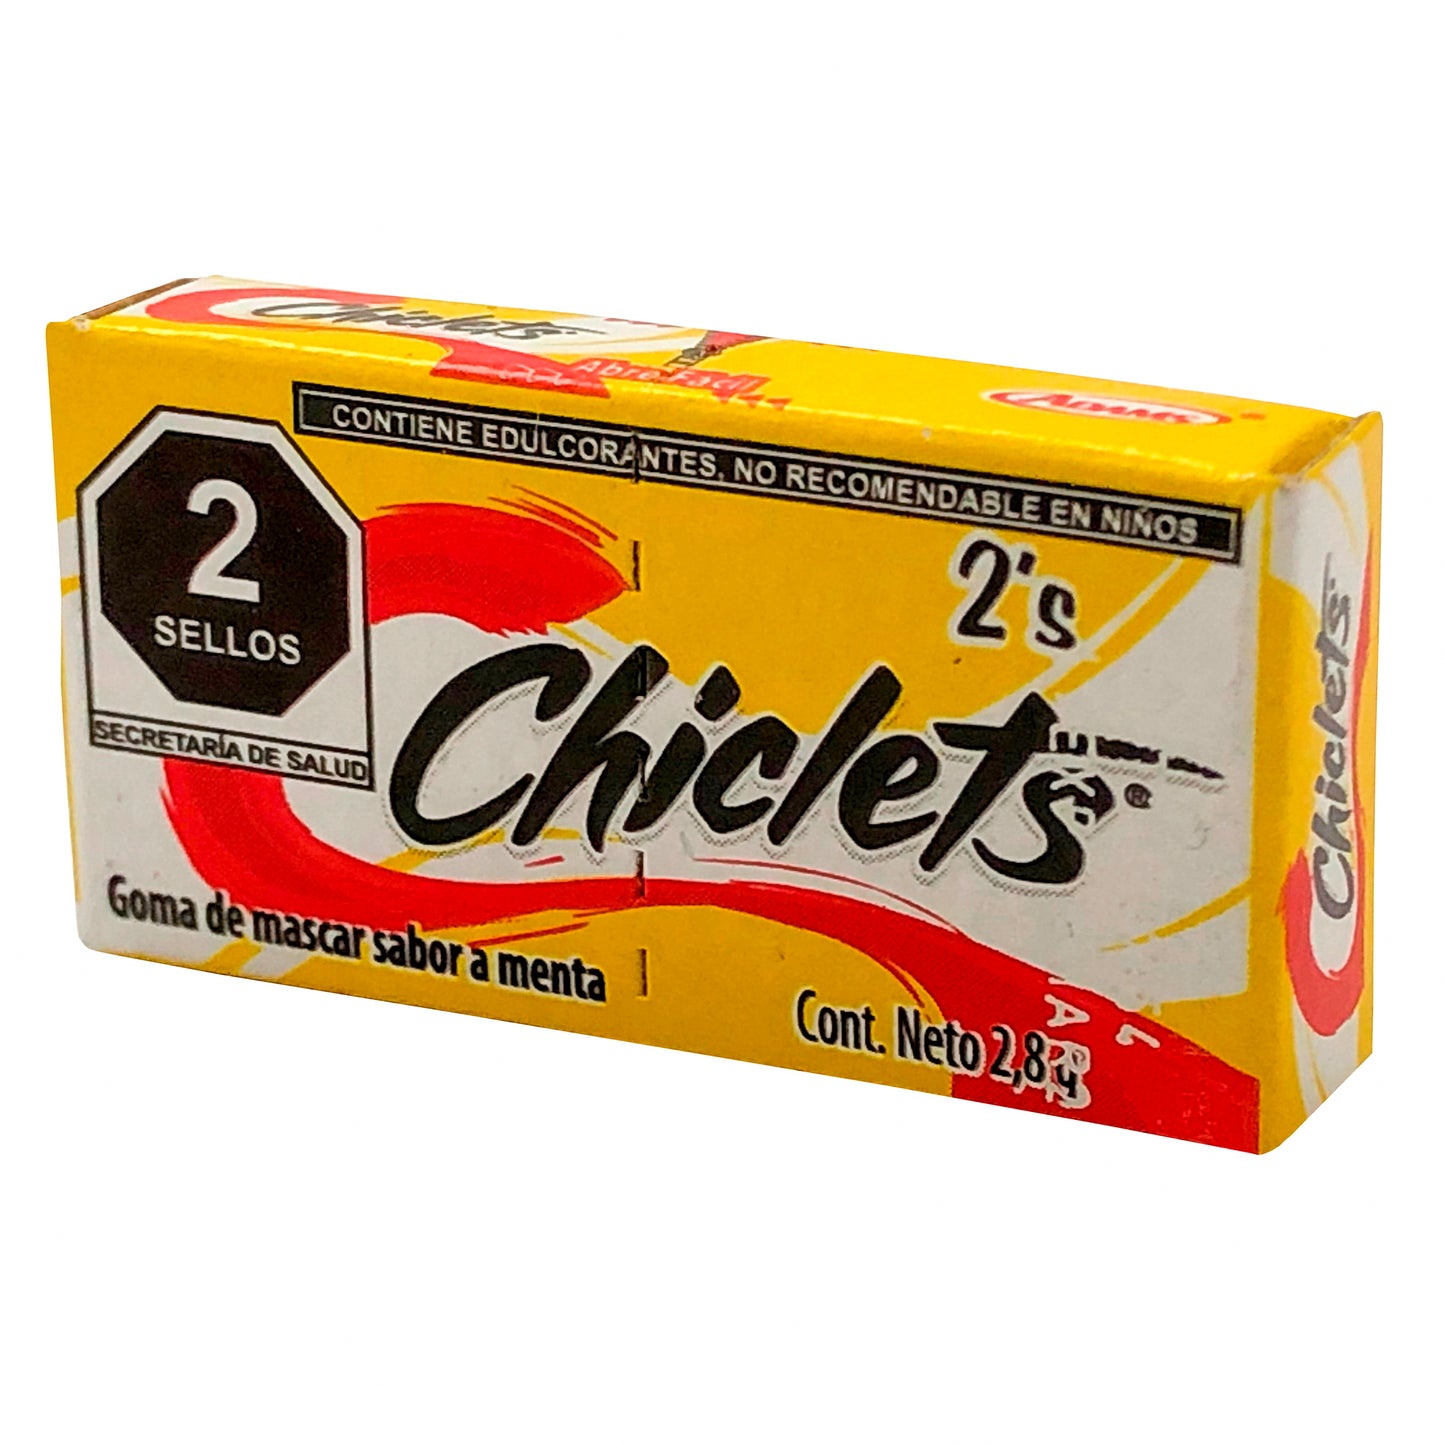 Chiclets 2.8g